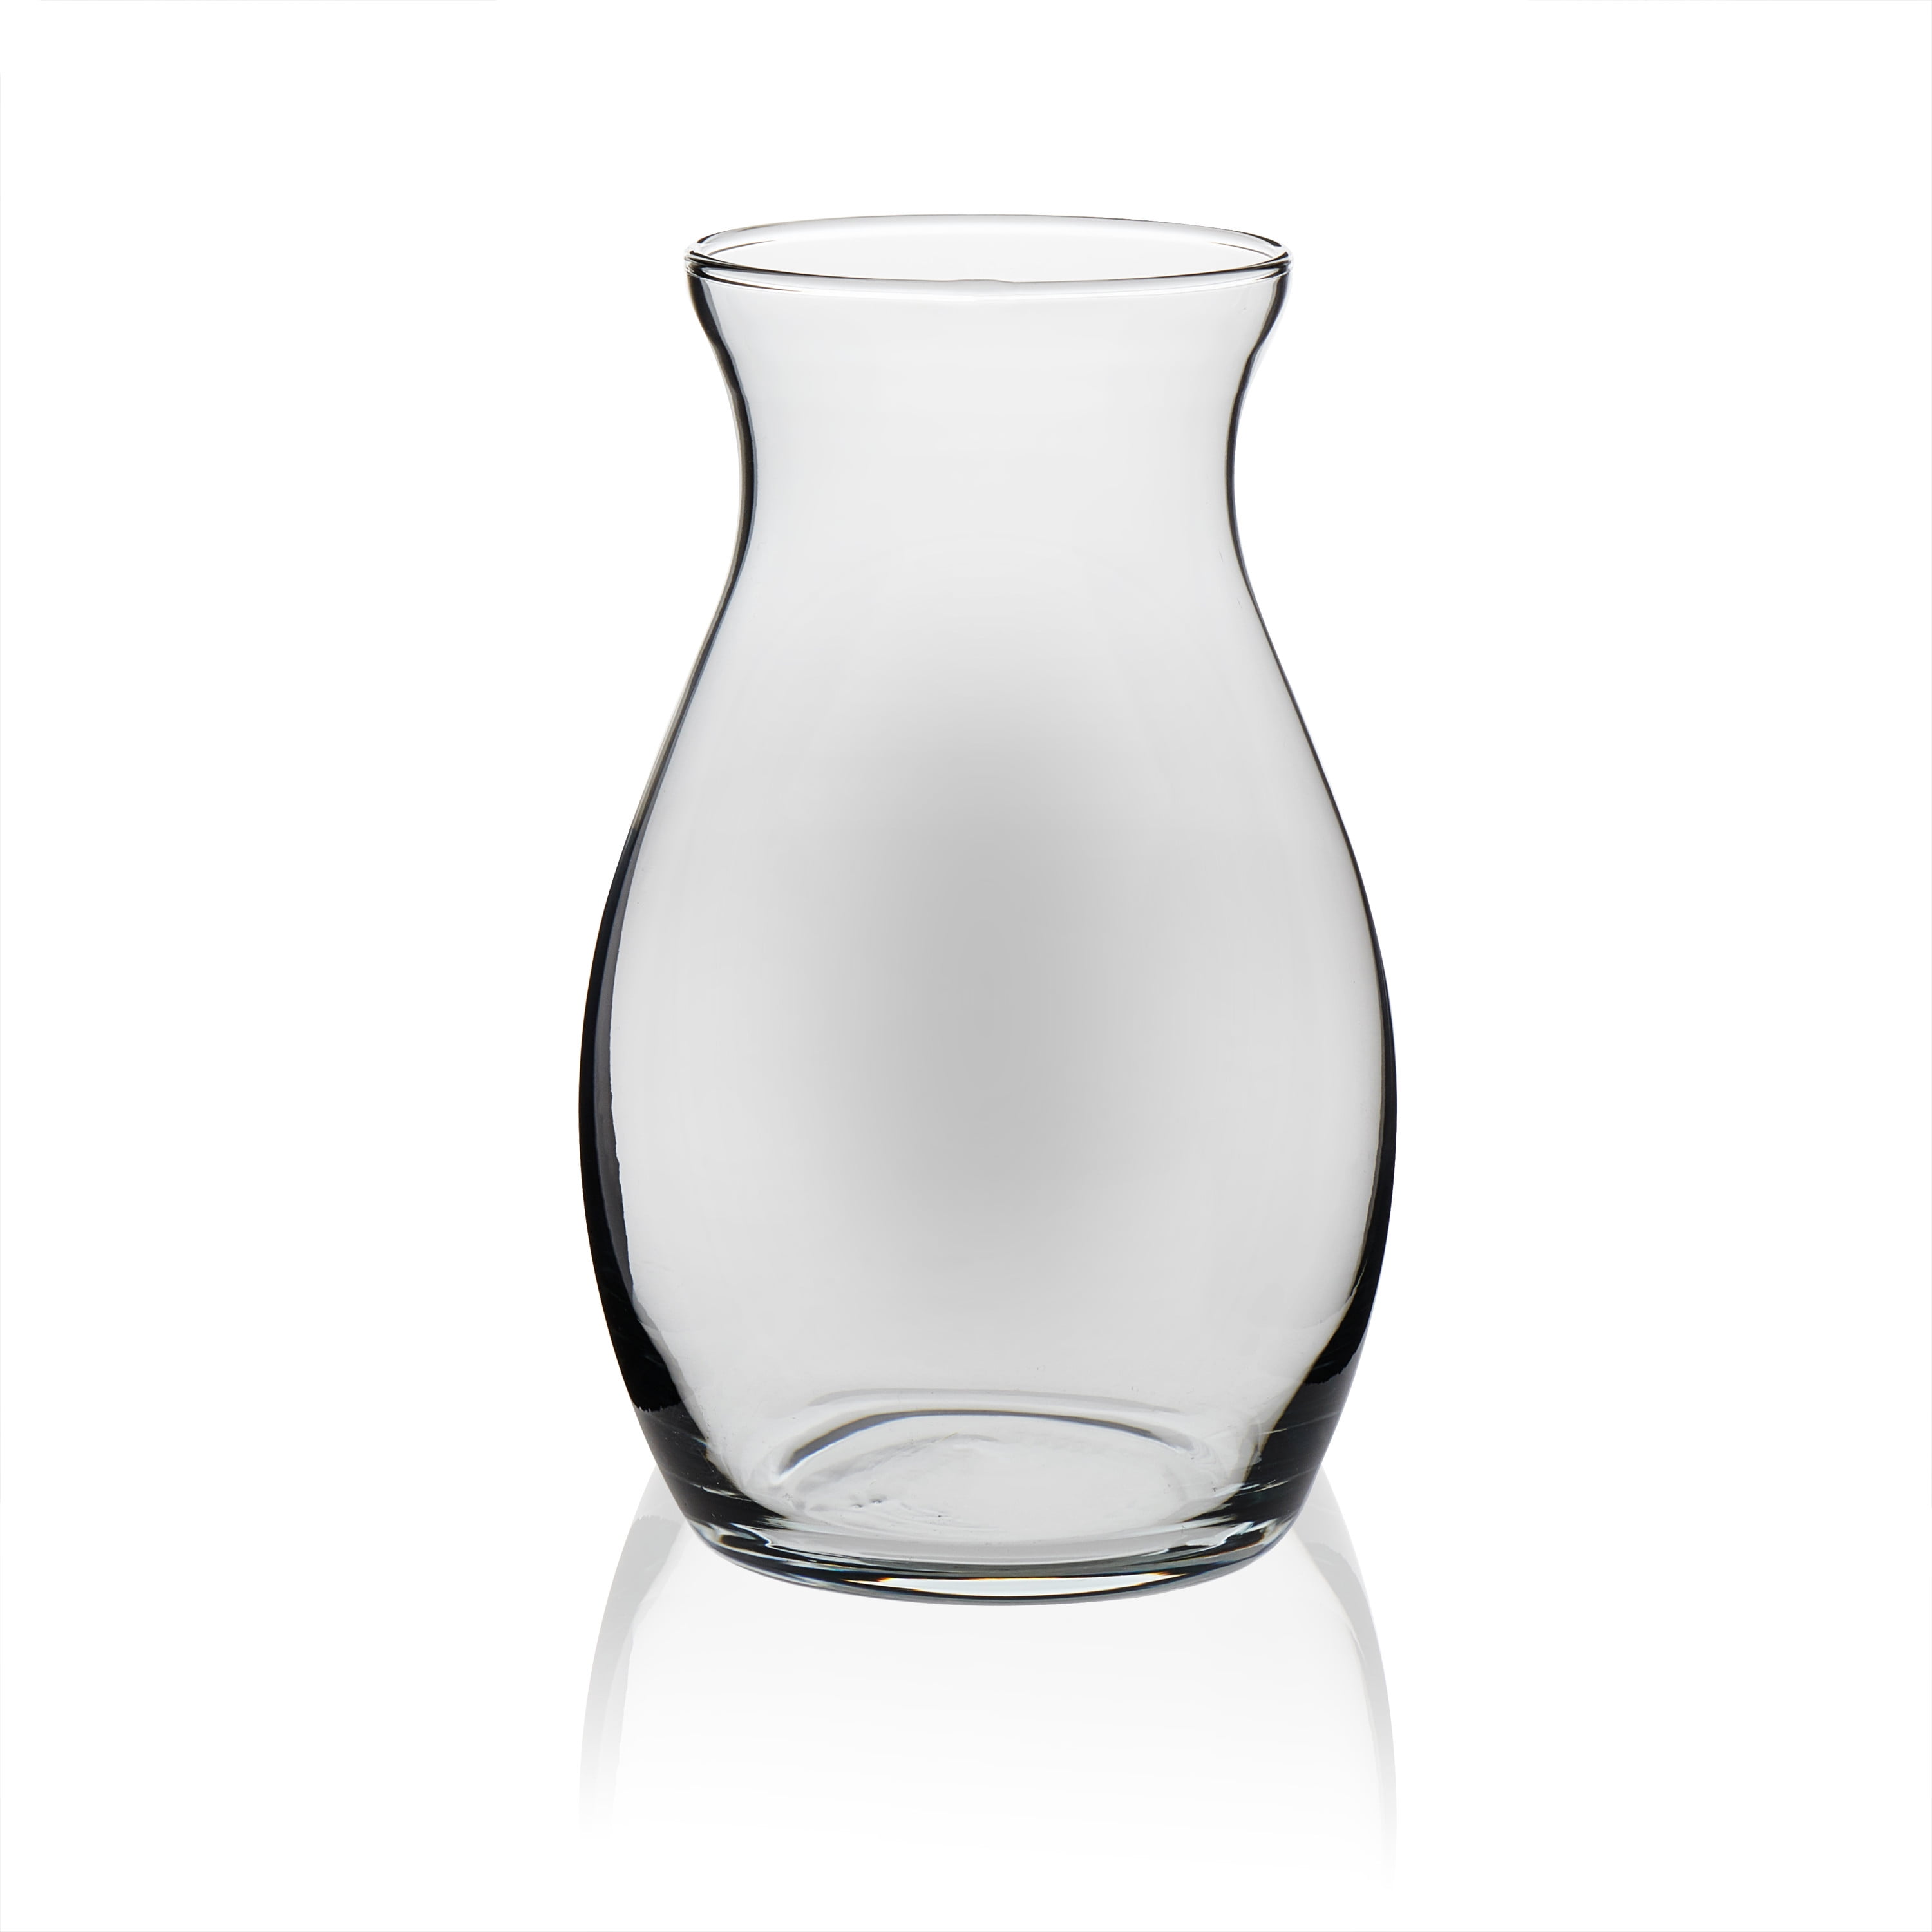 Clear Glass L Vase